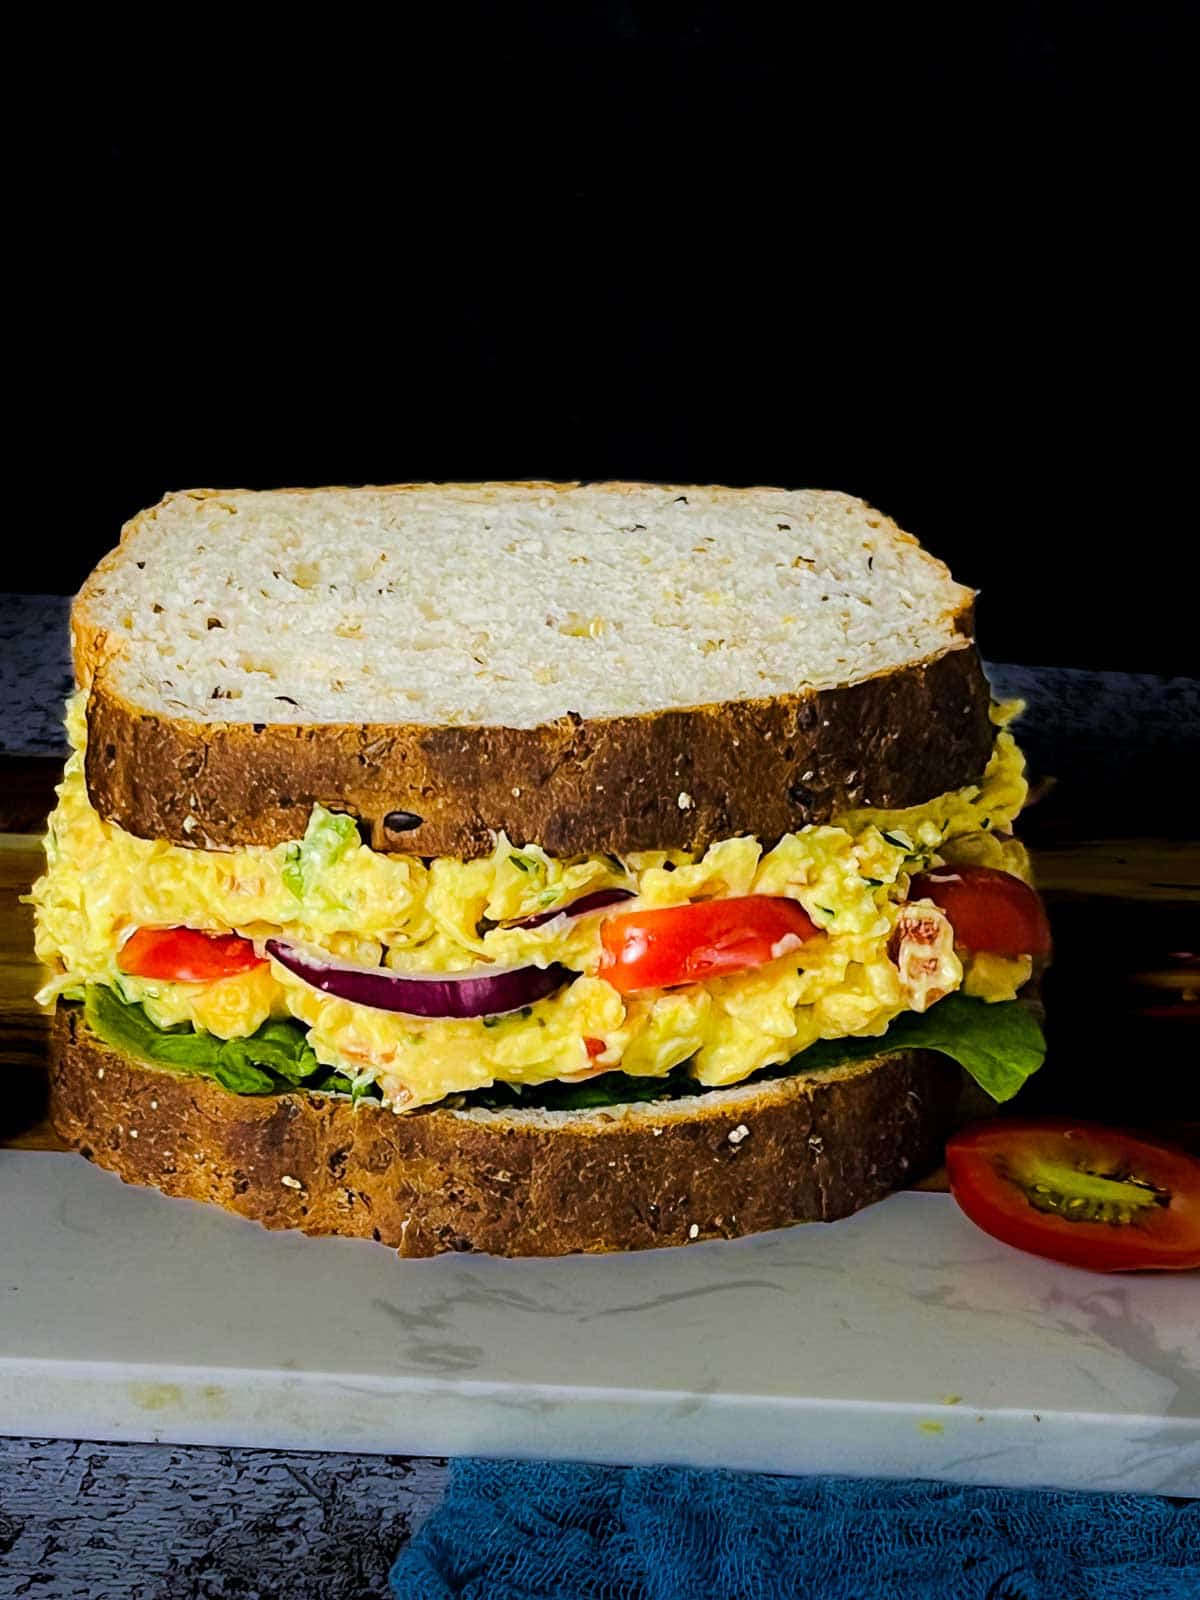 Assembled sandwich covered with top bread.